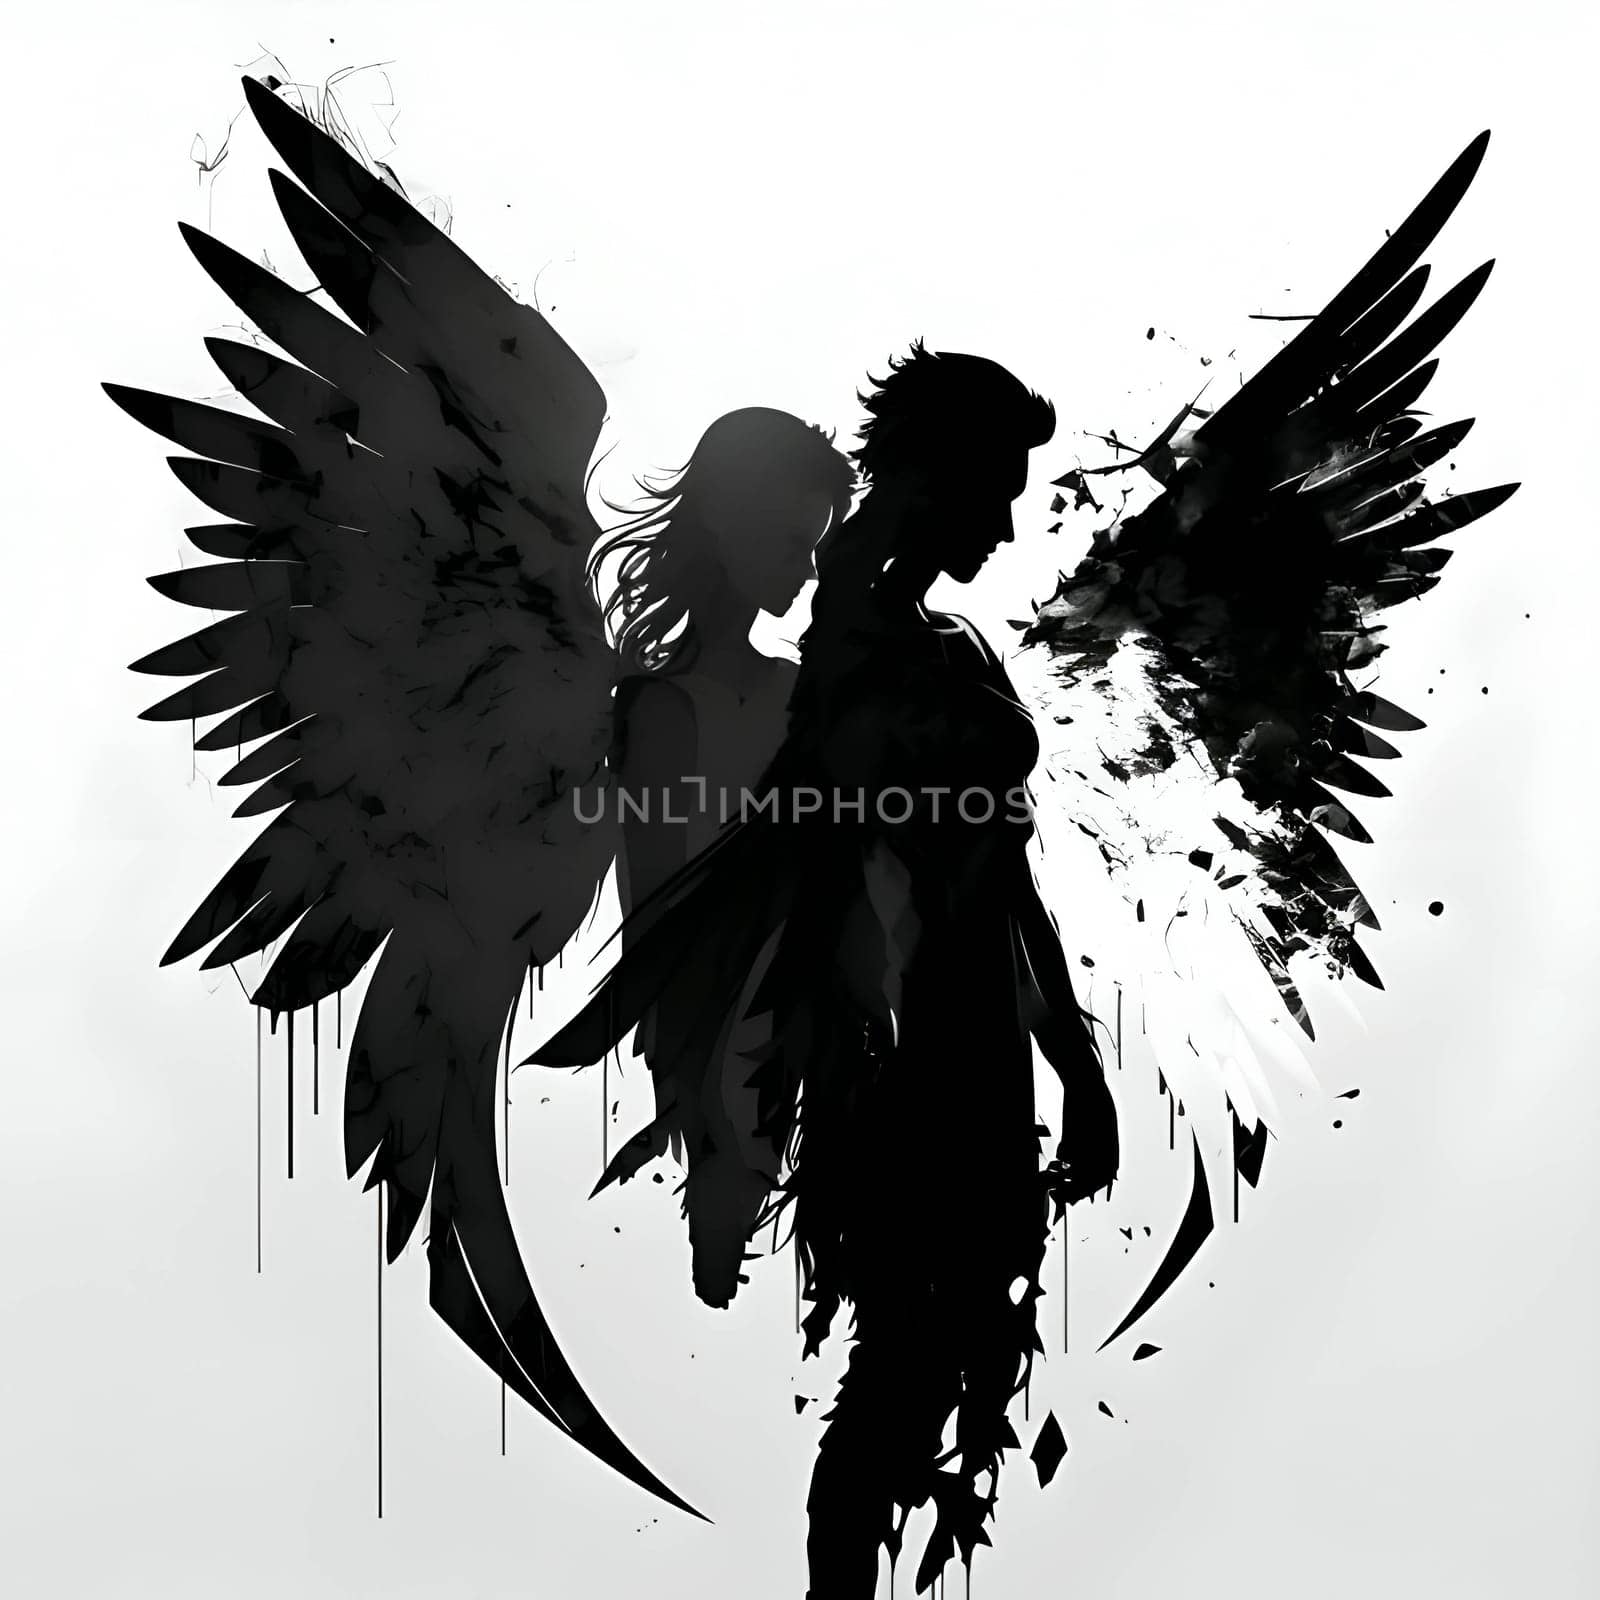 Vector illustration of an angel in black silhouette against a clean white background, capturing graceful forms.